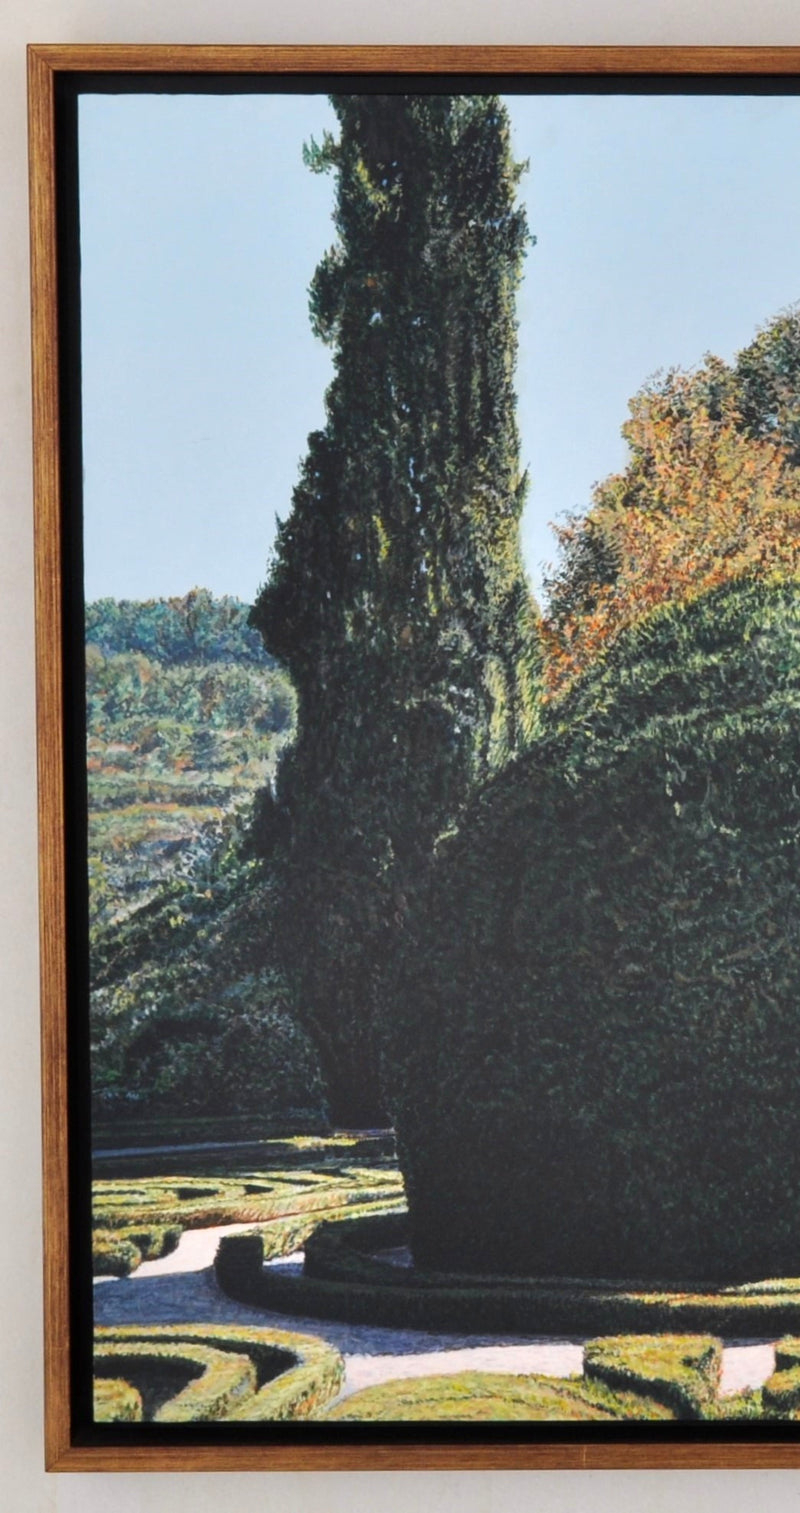 "Parterre at Casa de Mateus," Acrylic on Paper over Wood Panel, Tom Fawkes (1941- ), 2007